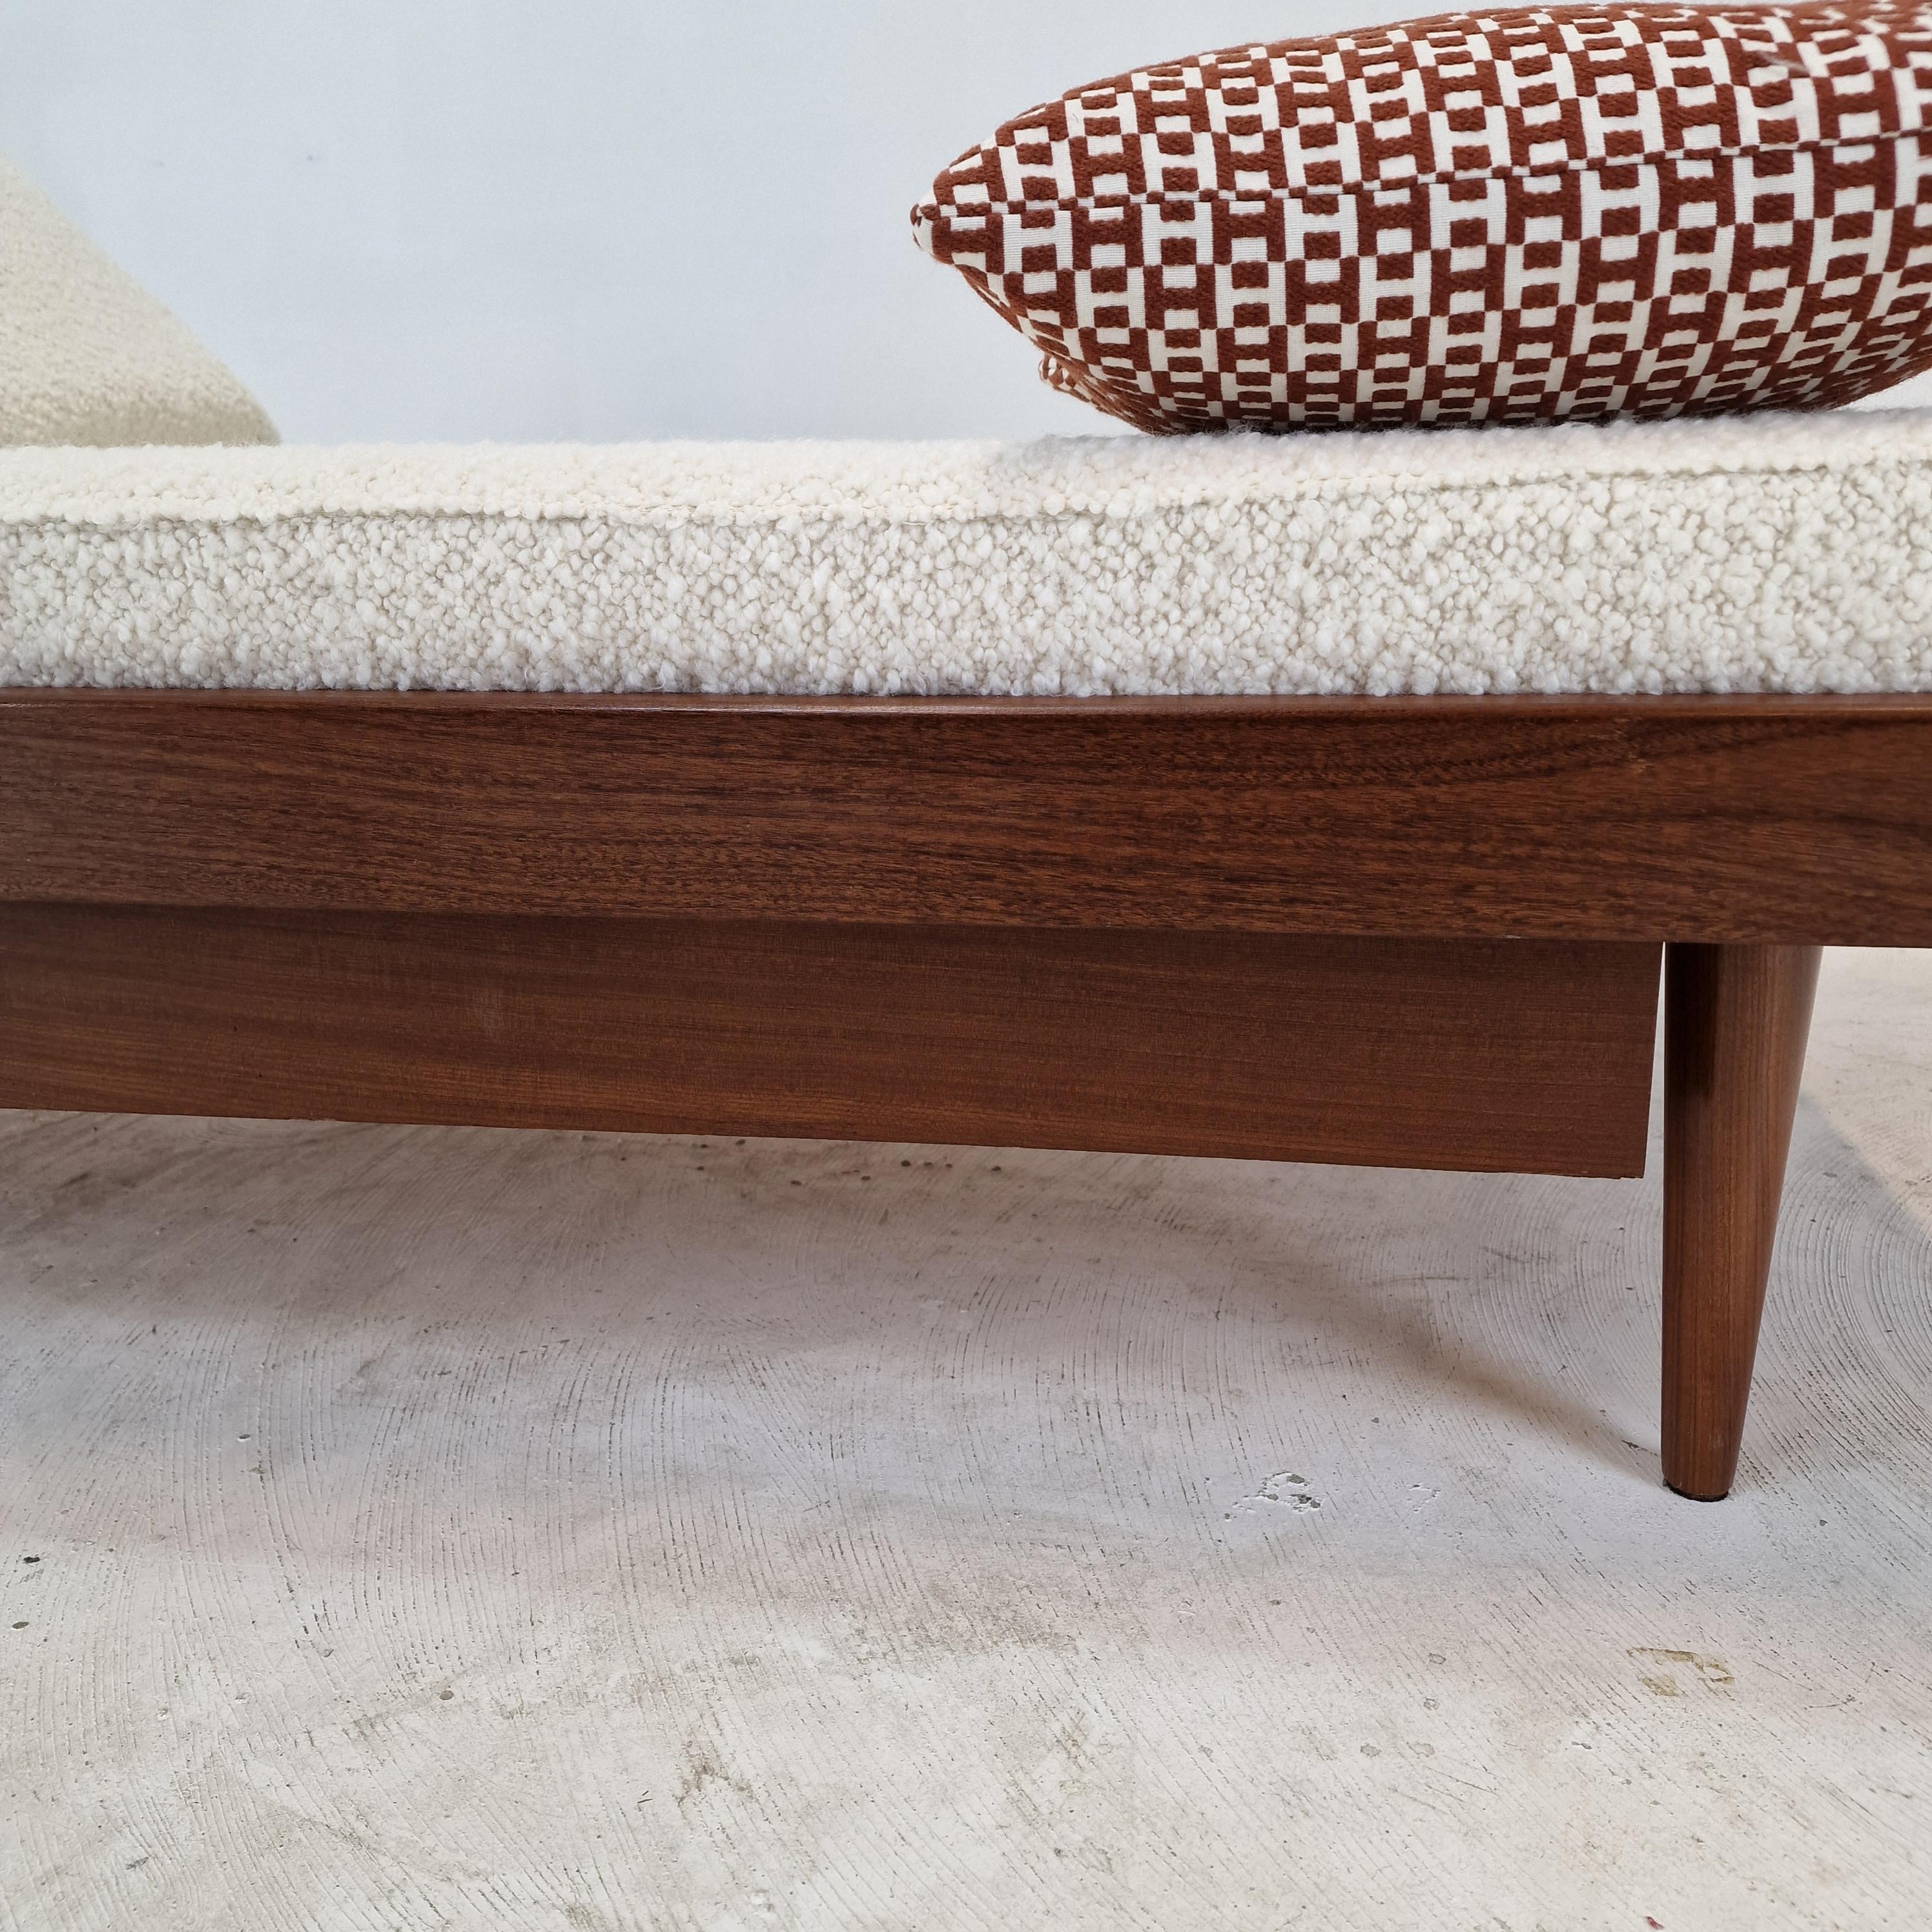 Teak Daybed with Hermes Cushions and Bolster, 1960s For Sale 5